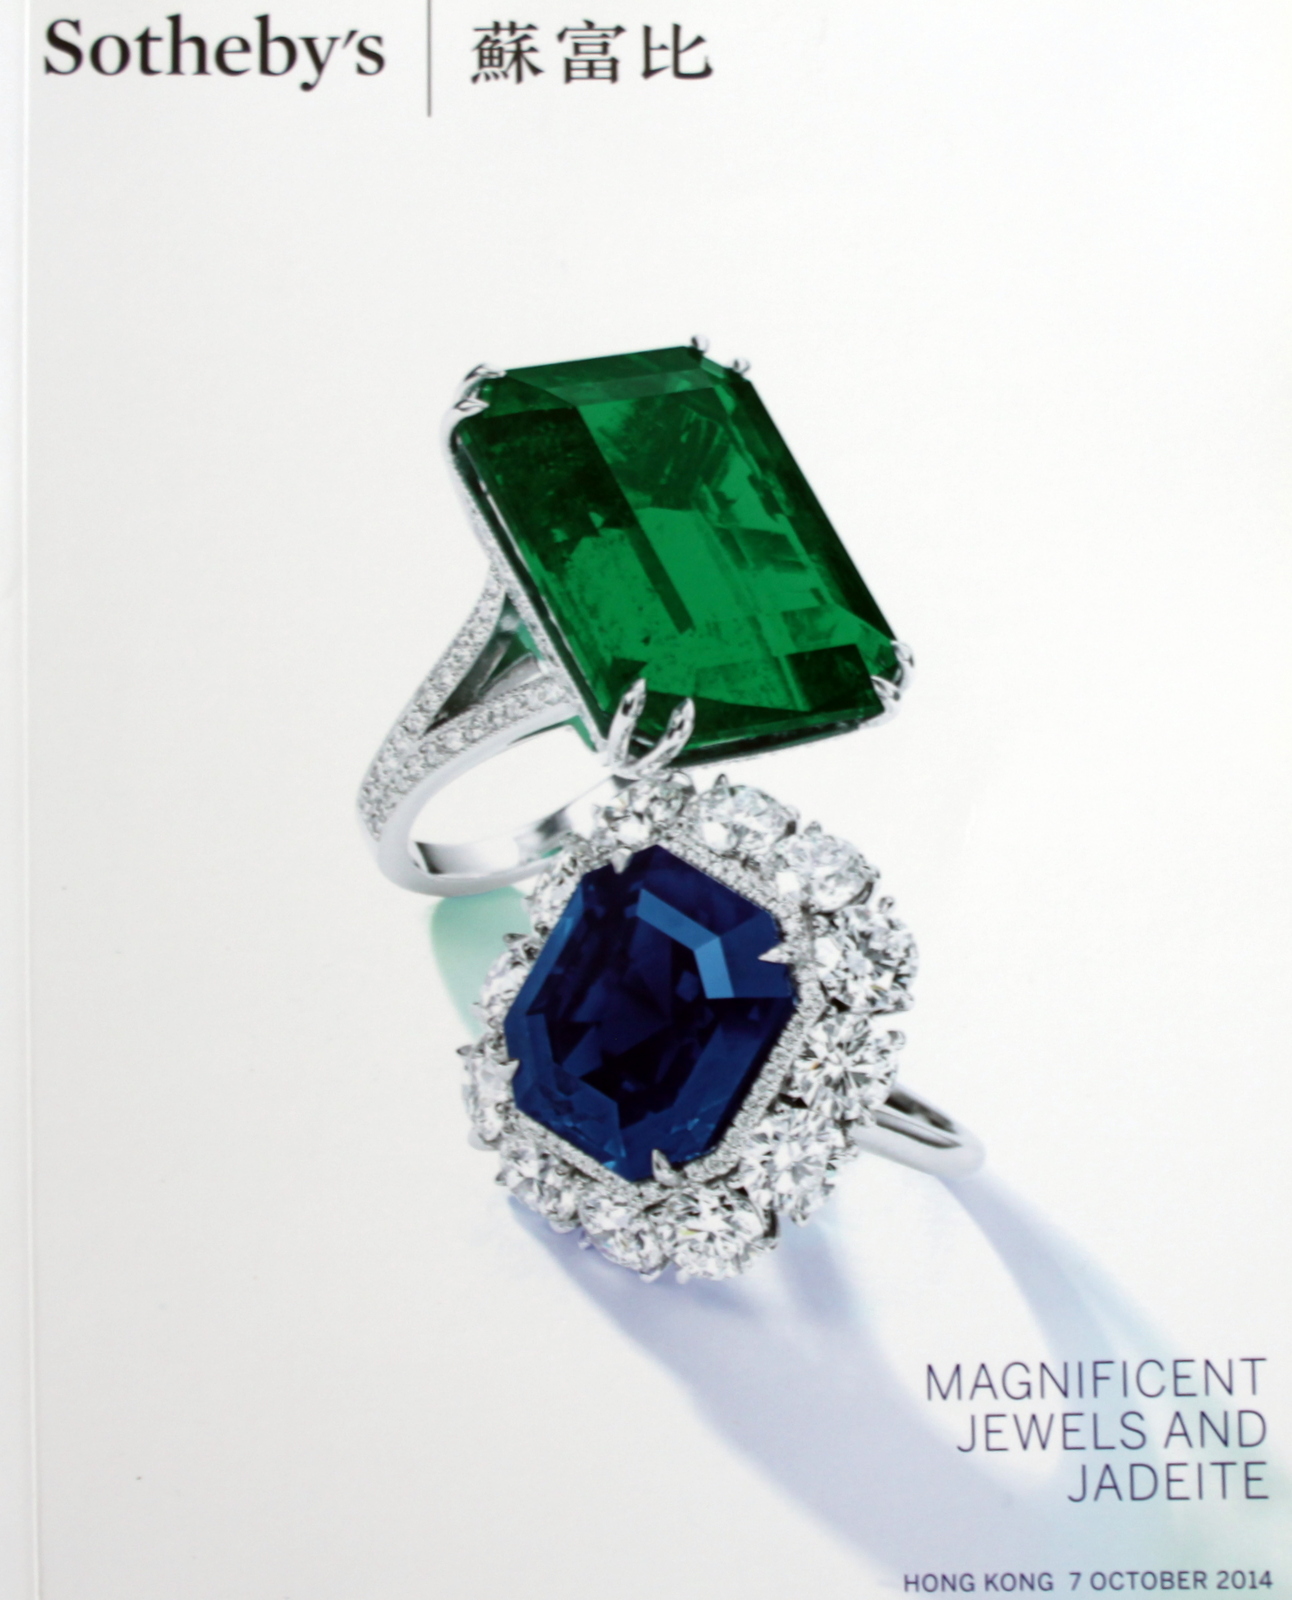 SO SOTHEBY'S MAGNIFICENT JEWELS & JADEITE HONG KONG 10/7/14 SALE CODE ...